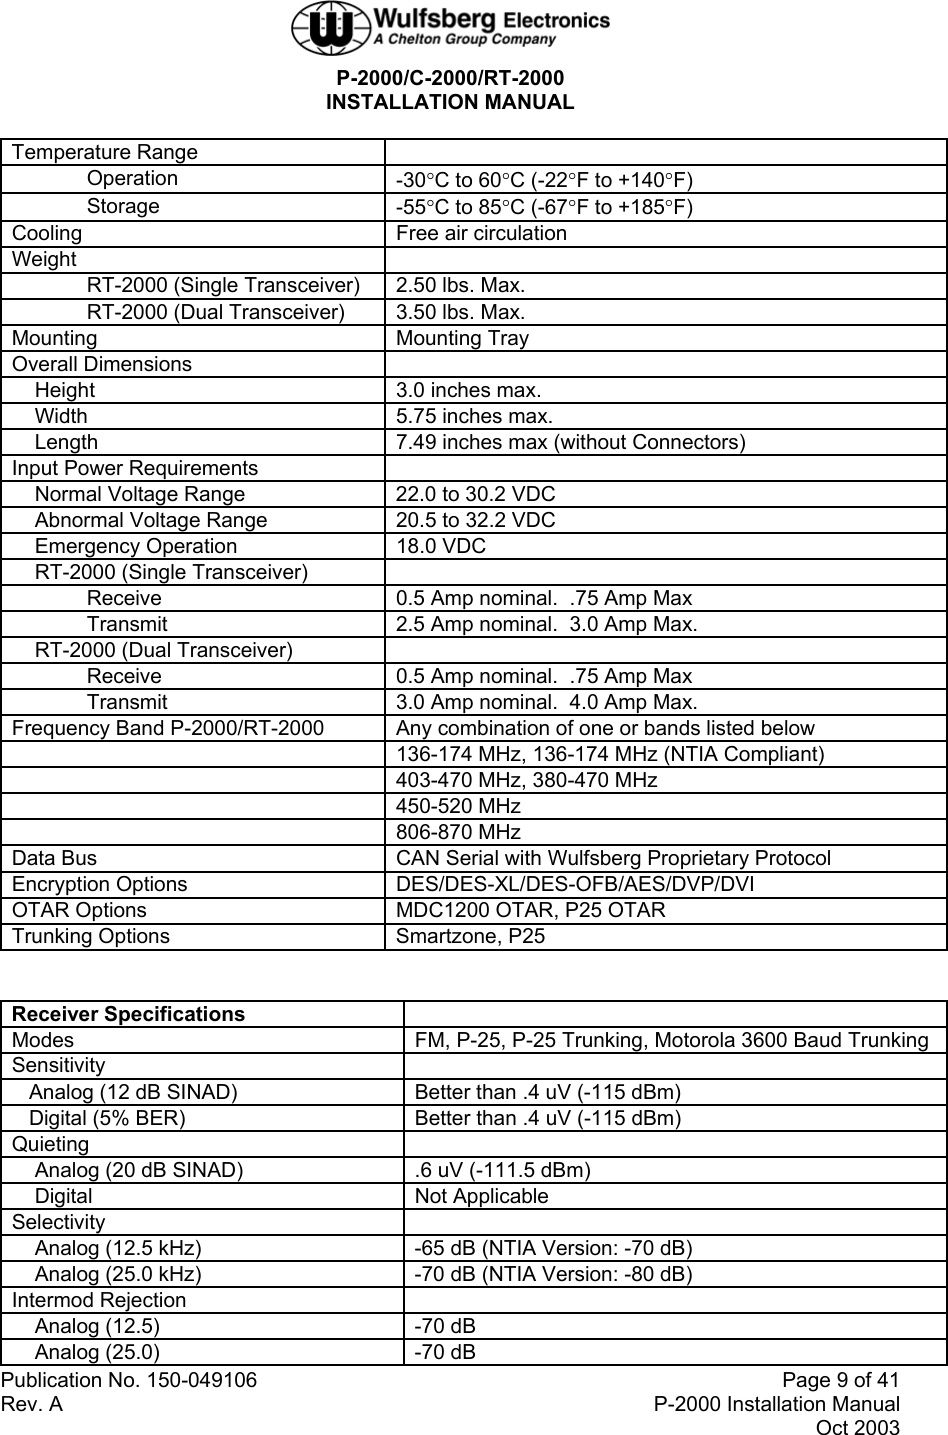  P-2000/C-2000/RT-2000 INSTALLATION MANUAL  Publication No. 150-049106  Page 9 of 41 Rev. A  P-2000 Installation Manual Oct 2003  Temperature Range    Operation  -30°C to 60°C (-22°F to +140°F)  Storage  -55°C to 85°C (-67°F to +185°F) Cooling  Free air circulation Weight    RT-2000 (Single Transceiver)  2.50 lbs. Max.   RT-2000 (Dual Transceiver)  3.50 lbs. Max. Mounting Mounting Tray Overall Dimensions       Height  3.0 inches max.     Width  5.75 inches max.     Length   7.49 inches max (without Connectors) Input Power Requirements       Normal Voltage Range  22.0 to 30.2 VDC     Abnormal Voltage Range  20.5 to 32.2 VDC     Emergency Operation  18.0 VDC     RT-2000 (Single Transceiver)     Receive  0.5 Amp nominal.  .75 Amp Max   Transmit  2.5 Amp nominal.  3.0 Amp Max.     RT-2000 (Dual Transceiver)     Receive  0.5 Amp nominal.  .75 Amp Max   Transmit  3.0 Amp nominal.  4.0 Amp Max. Frequency Band P-2000/RT-2000  Any combination of one or bands listed below   136-174 MHz, 136-174 MHz (NTIA Compliant)   403-470 MHz, 380-470 MHz  450-520 MHz    806-870 MHz Data Bus                             CAN Serial with Wulfsberg Proprietary Protocol Encryption Options  DES/DES-XL/DES-OFB/AES/DVP/DVI OTAR Options  MDC1200 OTAR, P25 OTAR Trunking Options  Smartzone, P25  Receiver Specifications   Modes  FM, P-25, P-25 Trunking, Motorola 3600 Baud Trunking Sensitivity     Analog (12 dB SINAD)  Better than .4 uV (-115 dBm)    Digital (5% BER)  Better than .4 uV (-115 dBm) Quieting      Analog (20 dB SINAD)  .6 uV (-111.5 dBm)     Digital  Not Applicable Selectivity      Analog (12.5 kHz)  -65 dB (NTIA Version: -70 dB)     Analog (25.0 kHz)  -70 dB (NTIA Version: -80 dB) Intermod Rejection       Analog (12.5)  -70 dB     Analog (25.0)  -70 dB 